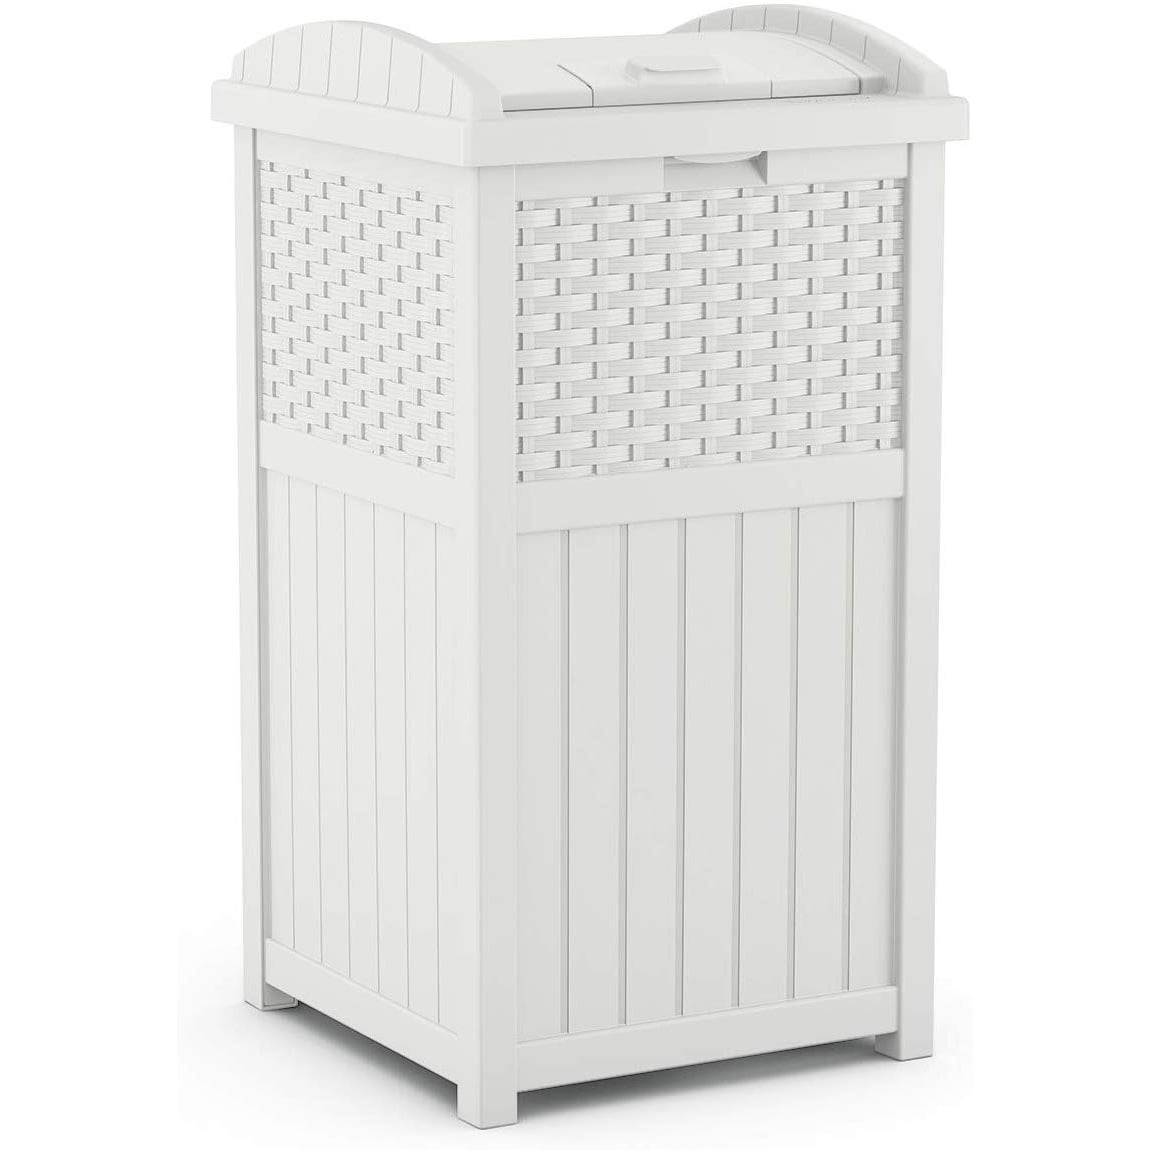 Suncast GHW1732WH Resin Outdoor Hideaway Trash Can Bin with Latching Lid, White